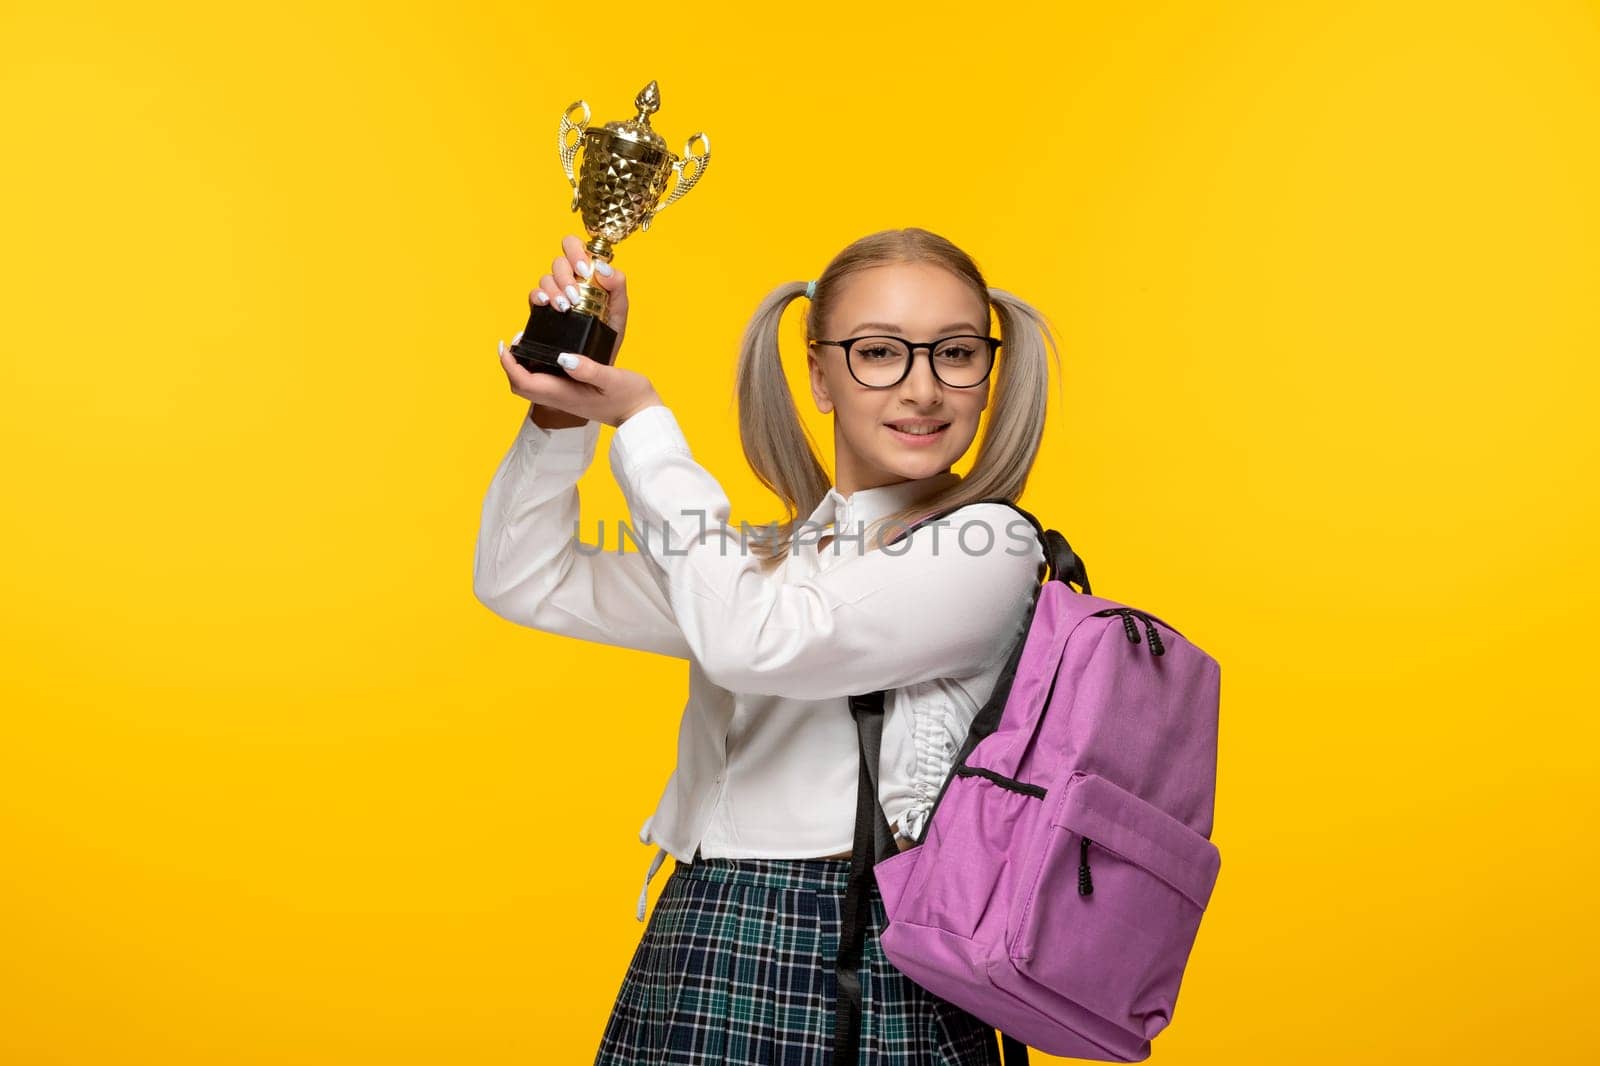 world book day excited blonde schoolgirl on yellow background holding a price by Kamran